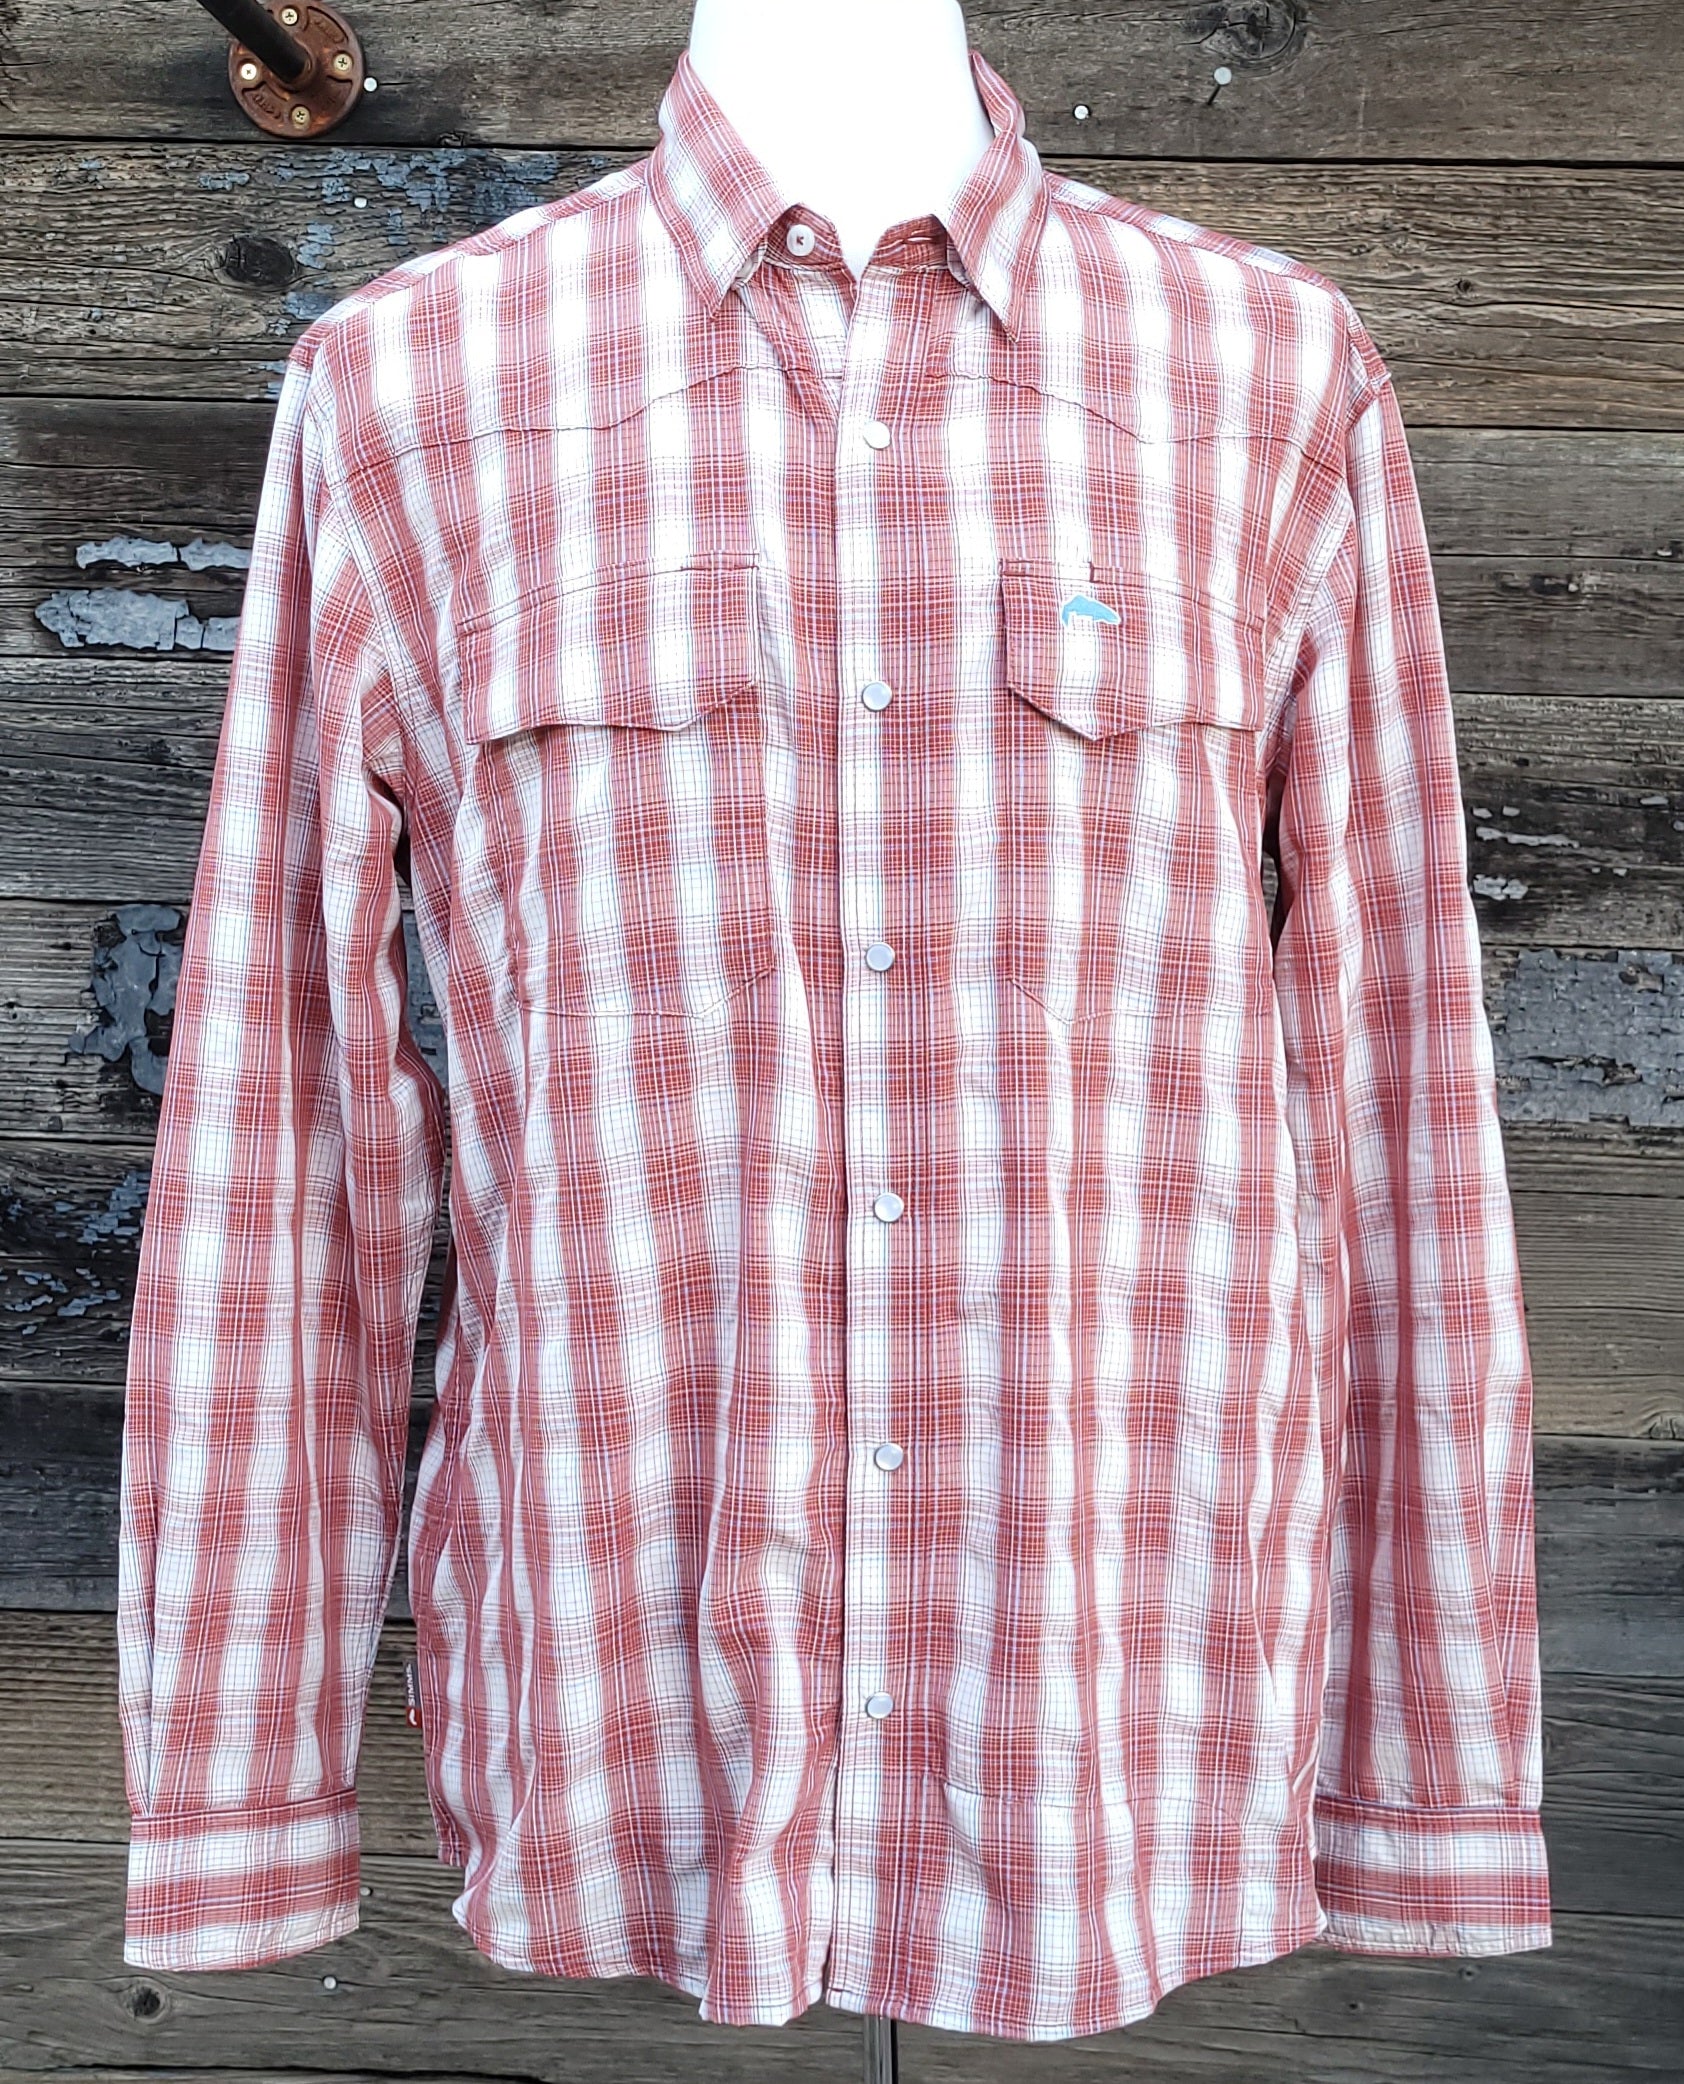 Simms - Big Sky Men's Long Sleeved Snap Shirt - Cutty Red and Bright Blue Plaid